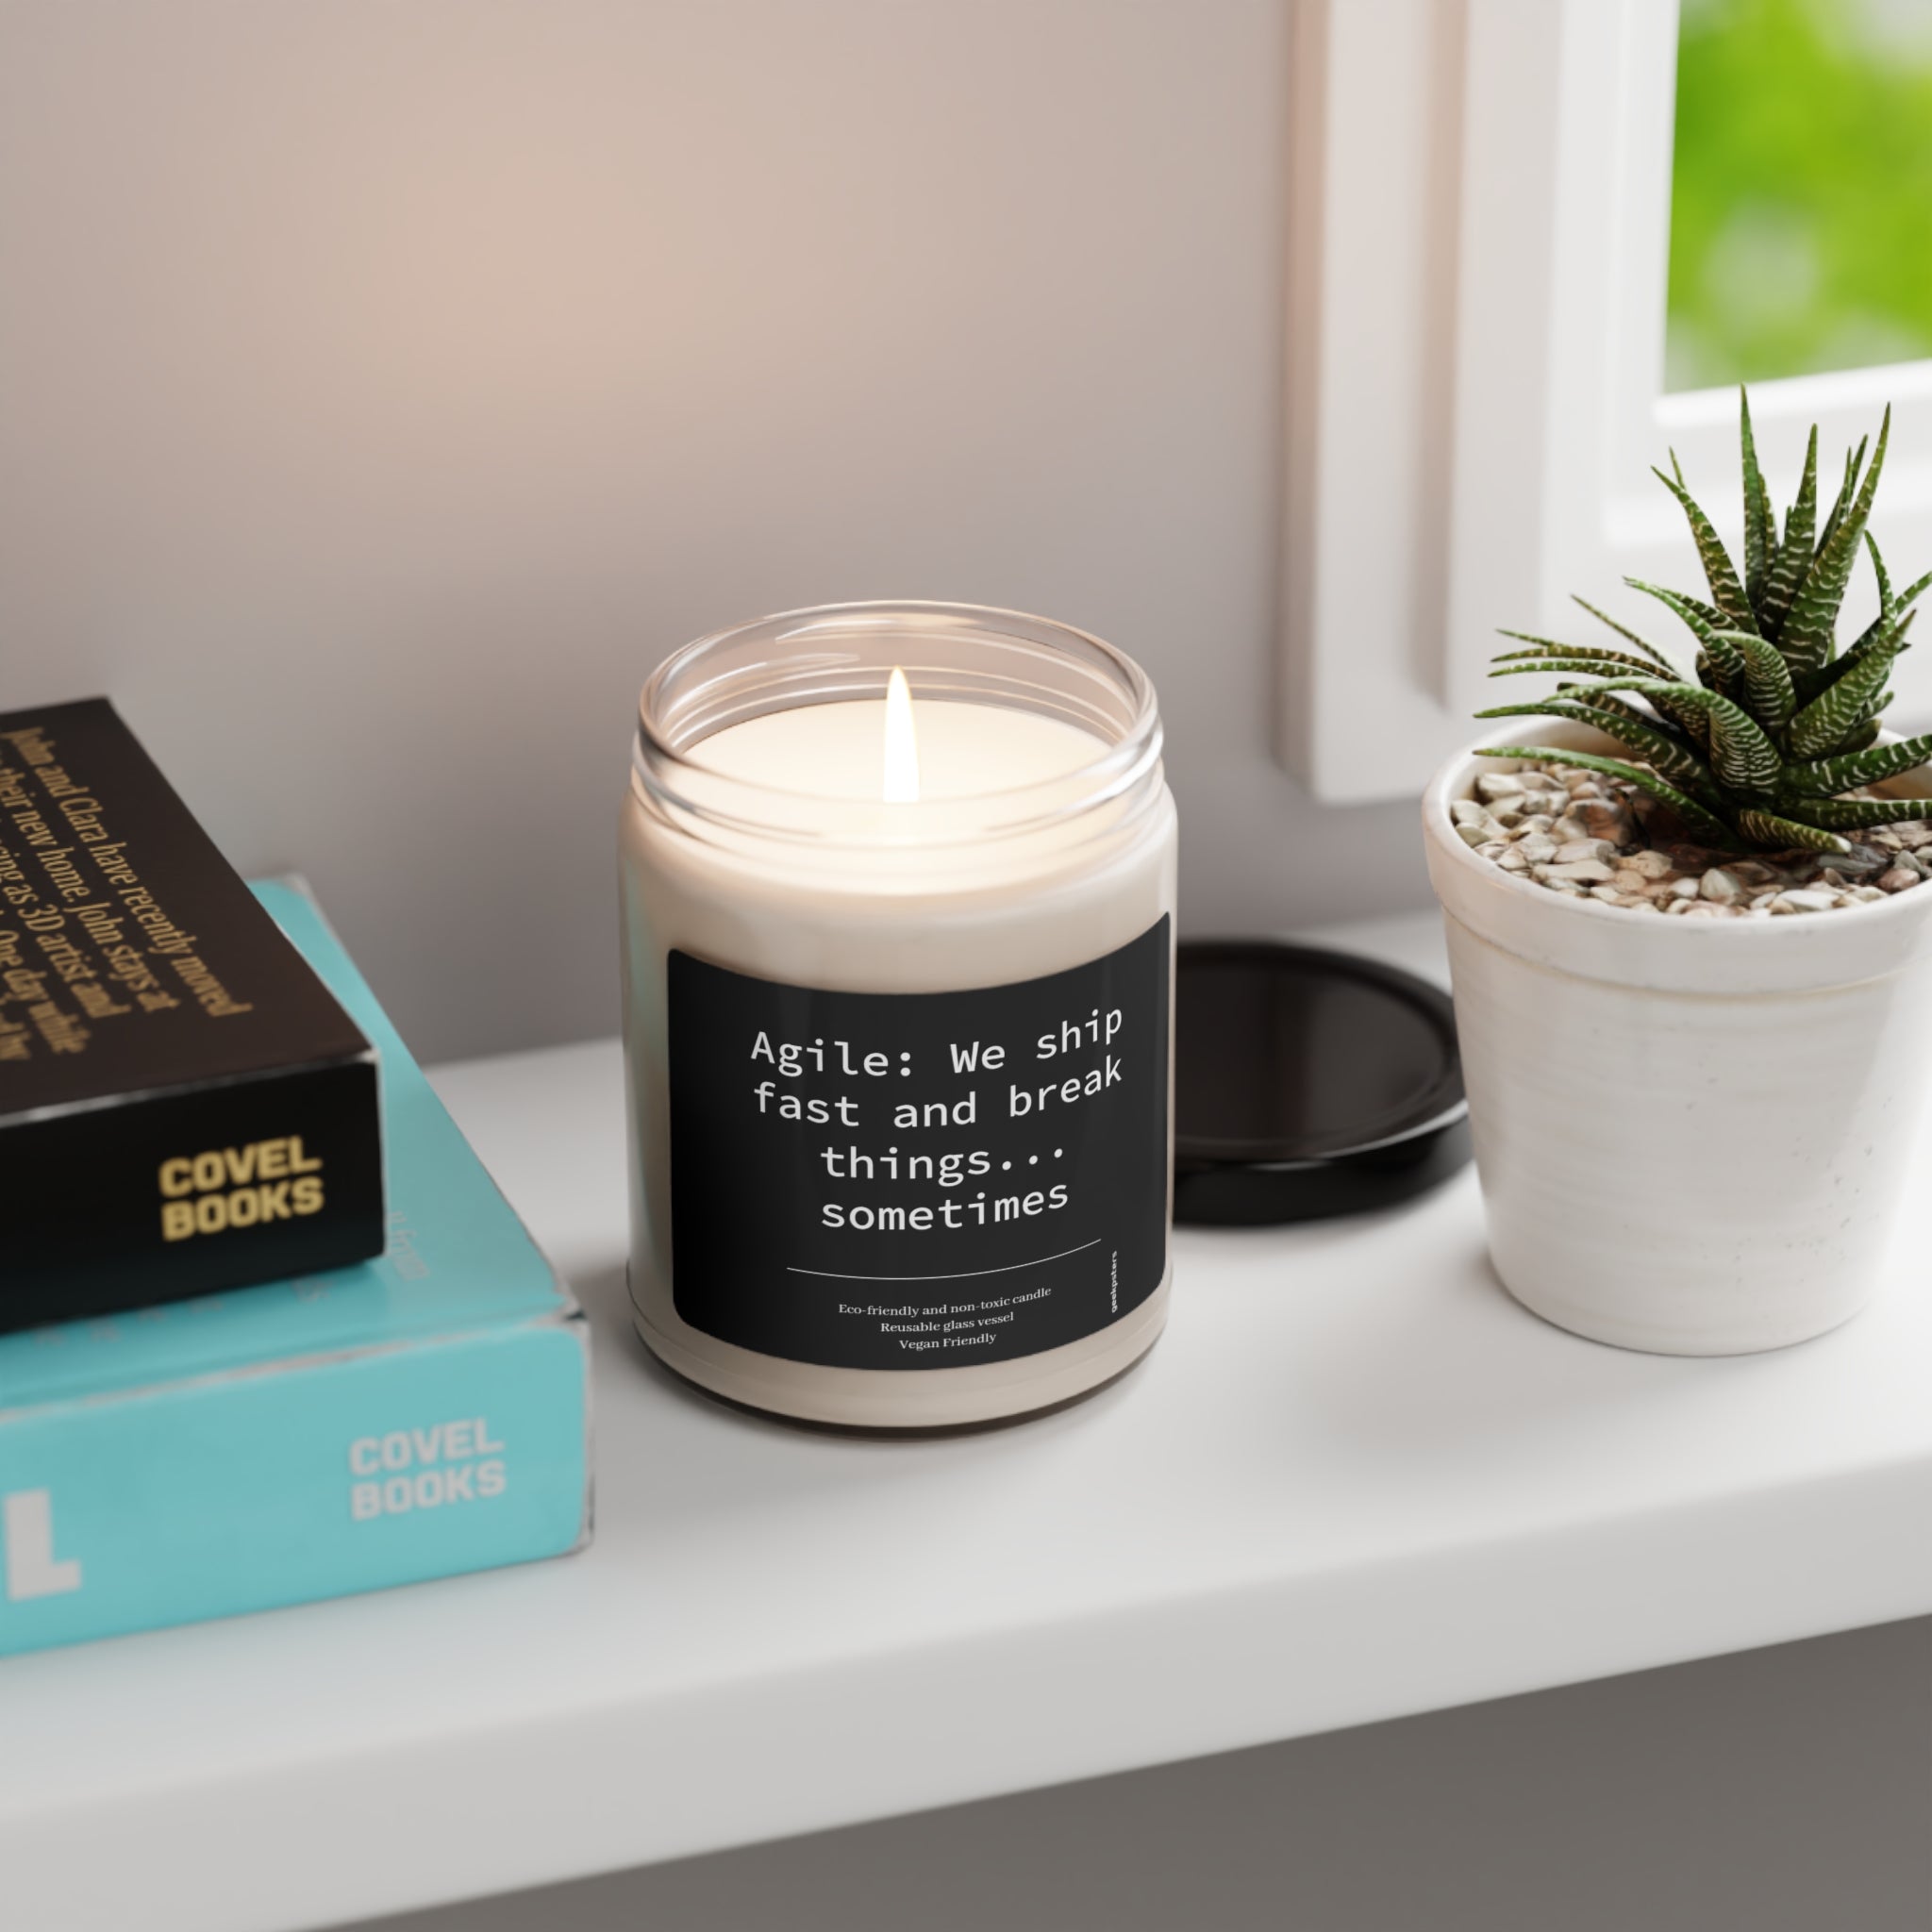 A Agile: We Ship Fast and Brake Things scented soy candle placed on a windowsill next to stacked books and a potted plant.